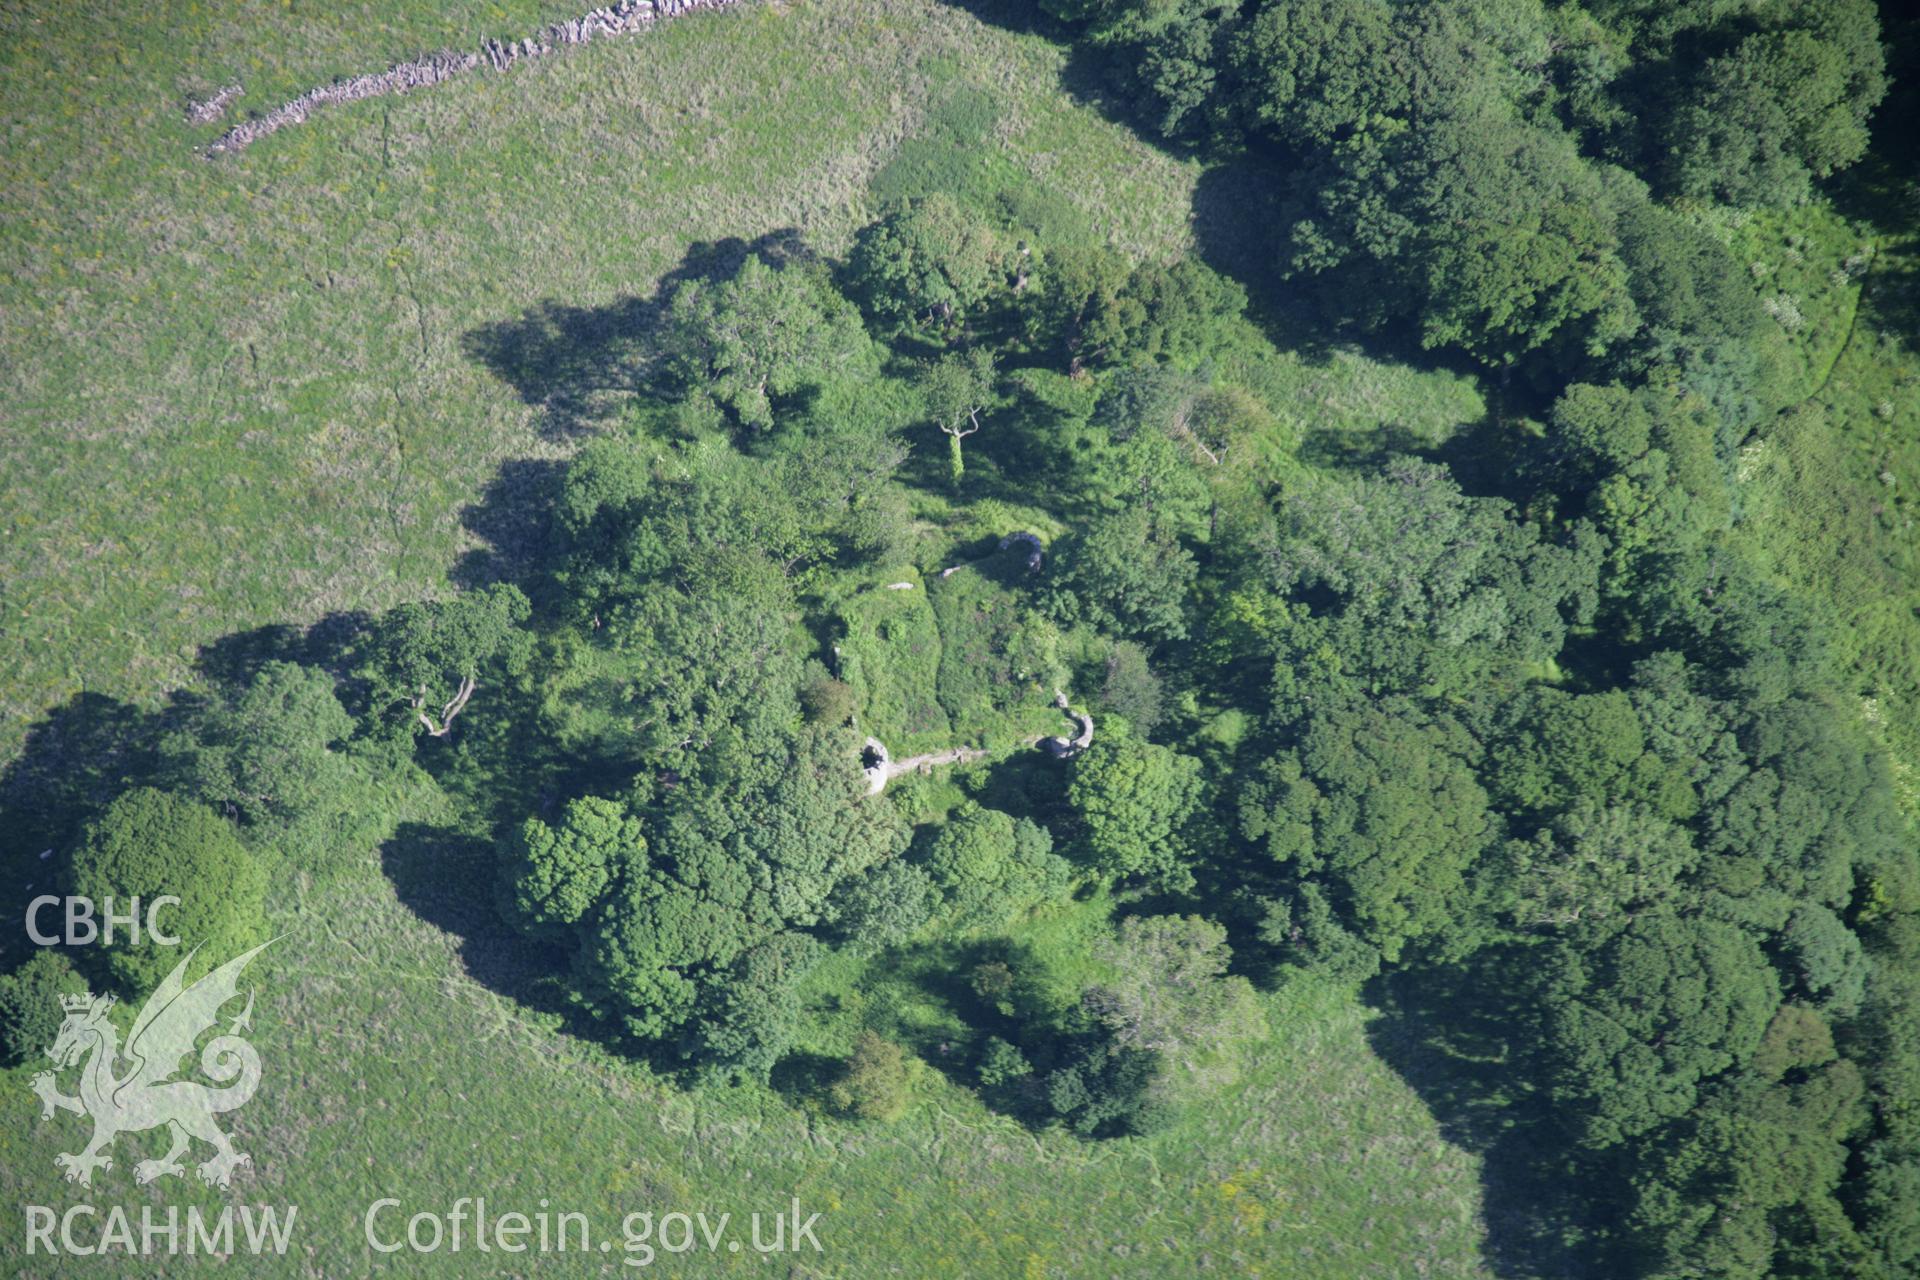 RCAHMW colour oblique aerial photograph of the castle earthworks and civil war fort at Castell Aberlleiniog, from the north-west. Taken on 14 June 2006 by Toby Driver.